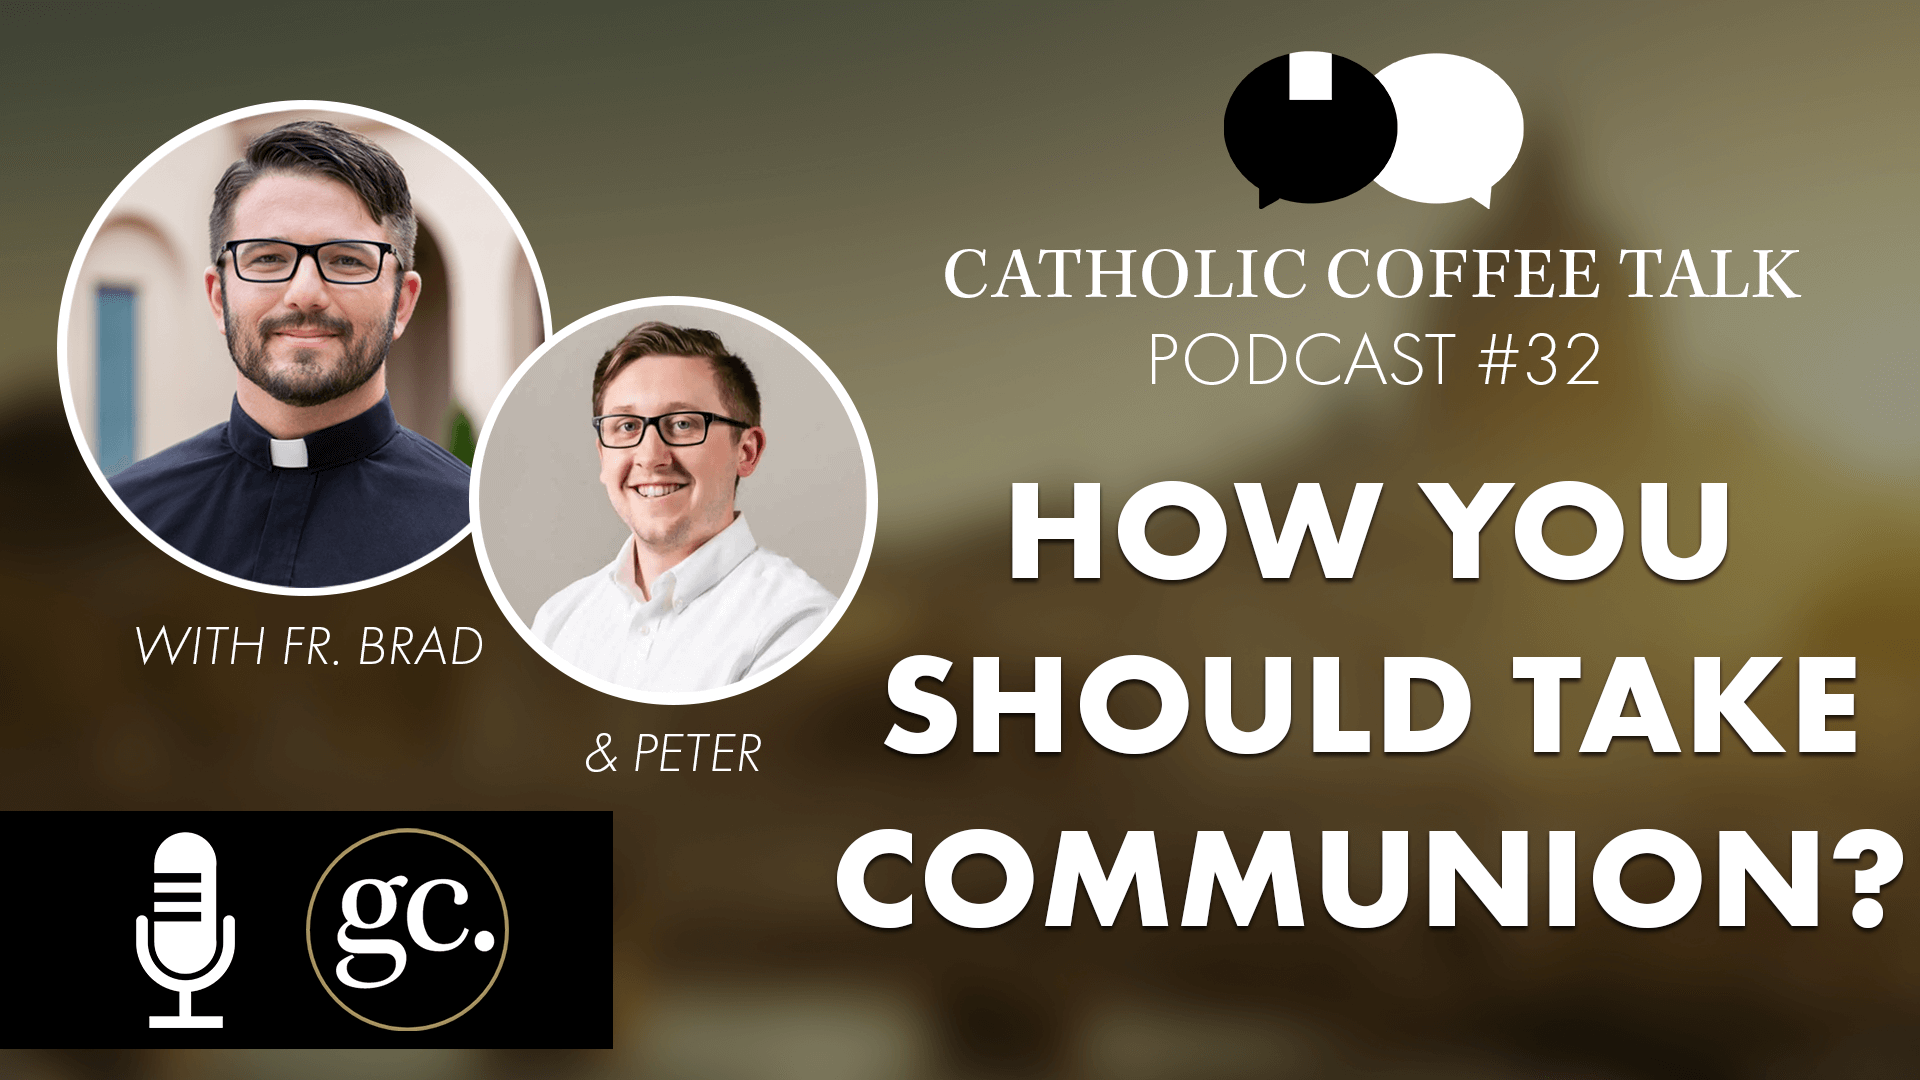 Why Stand for Communion? | Catholic Coffee Talk #32